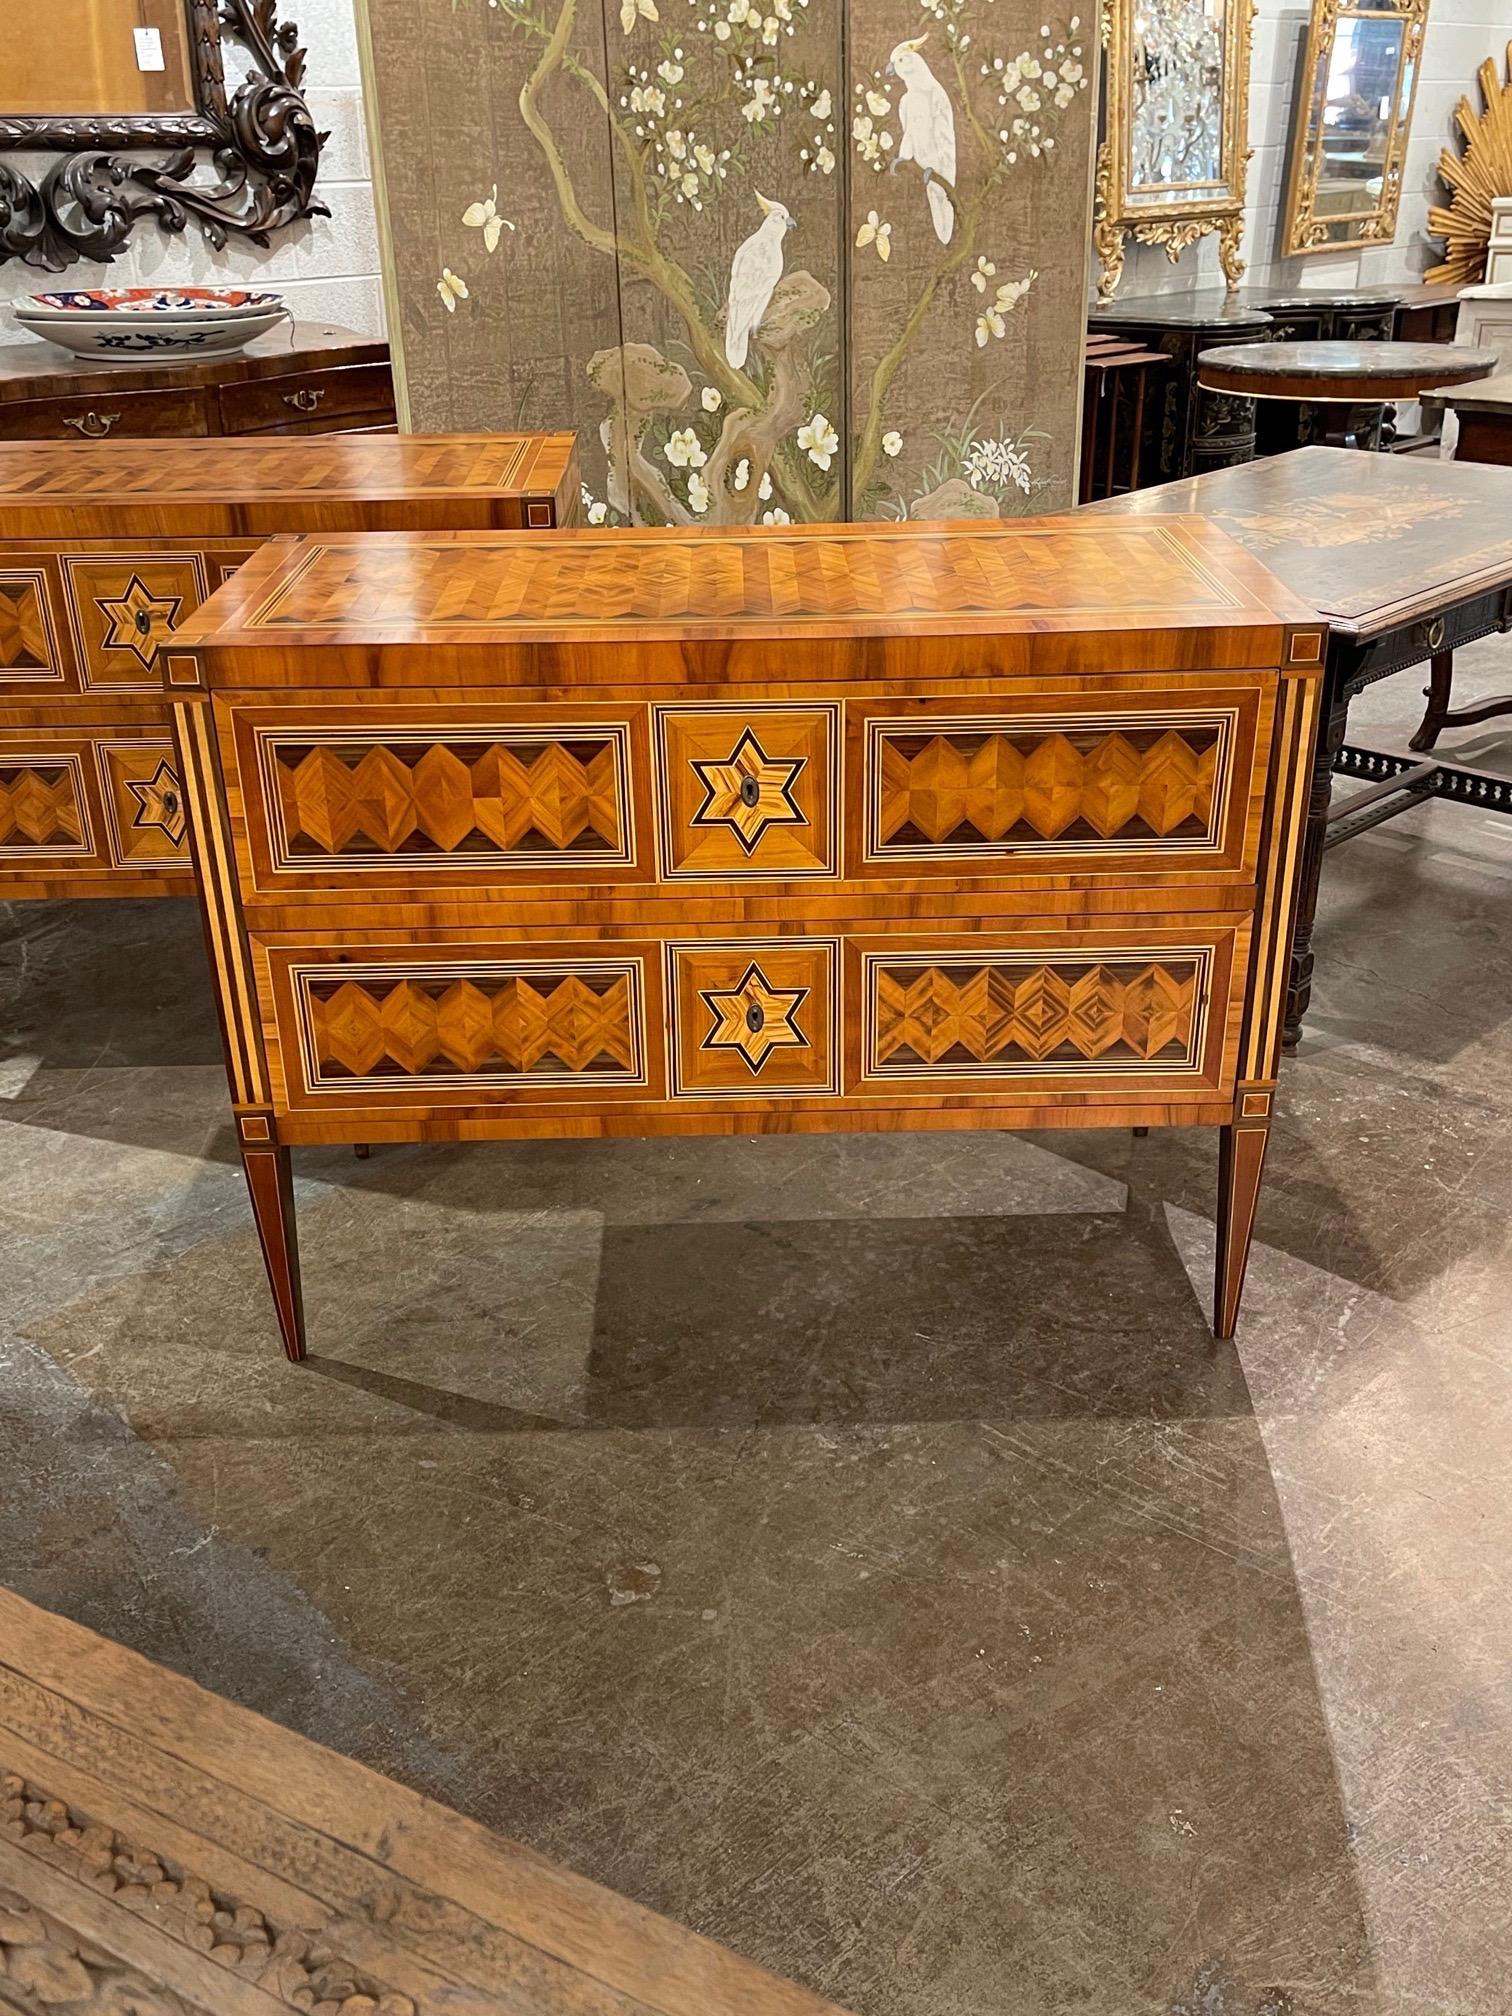 Very fine pair of Northern Italian walnut commodes with star inlay as well as an interesting 3 D like pattern.
The finish on these is also exceptional. Superb!!